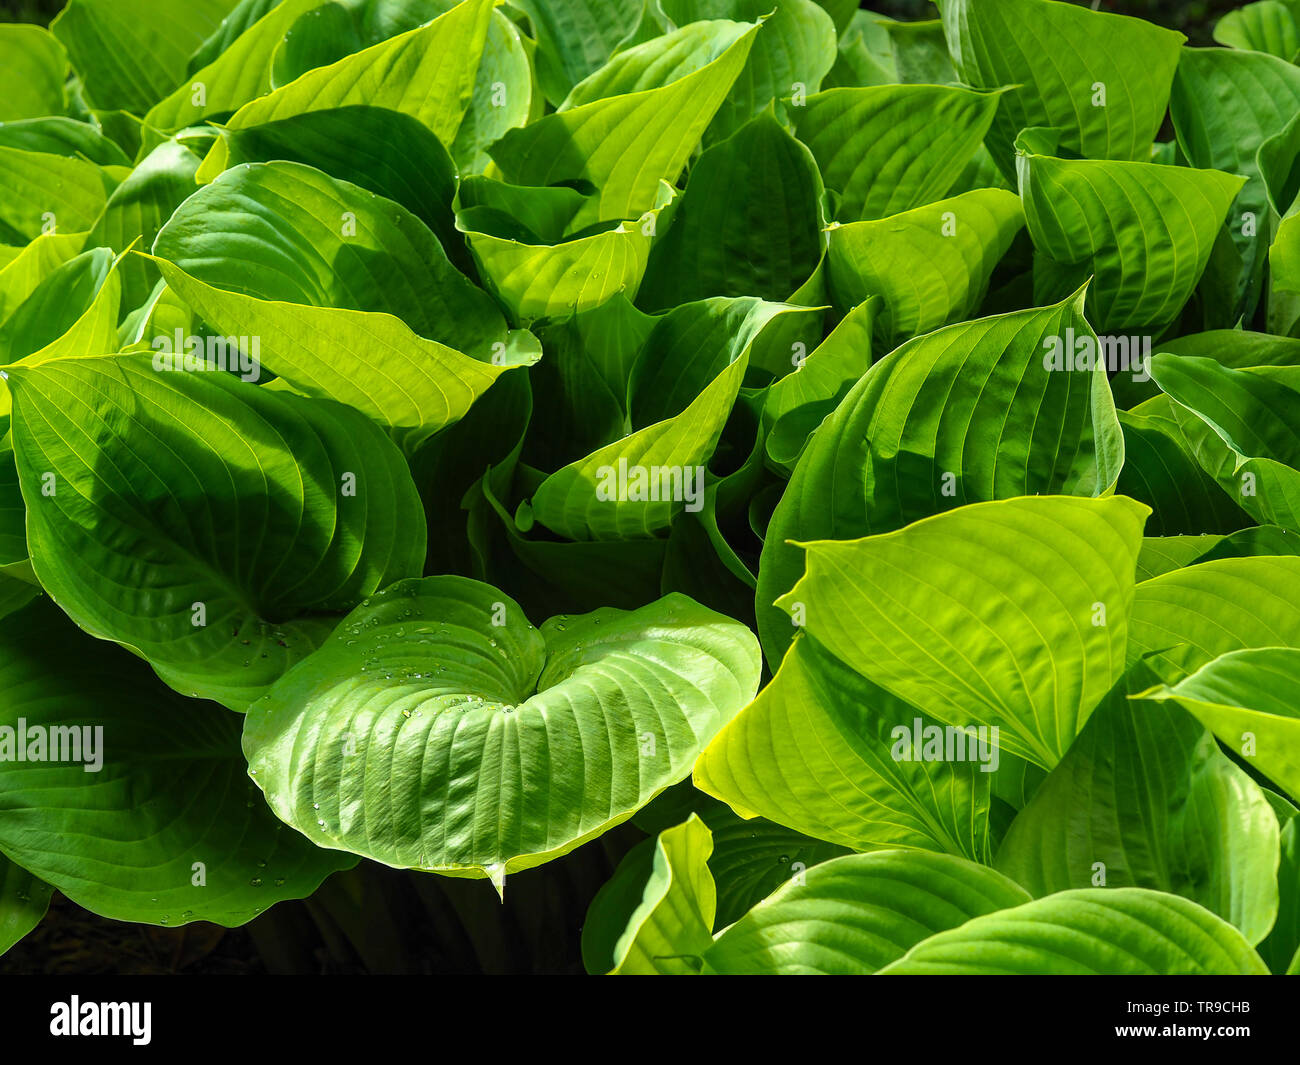 Closeup of the dense green leaves of a Hosta plant with some raindrops Stock Photo